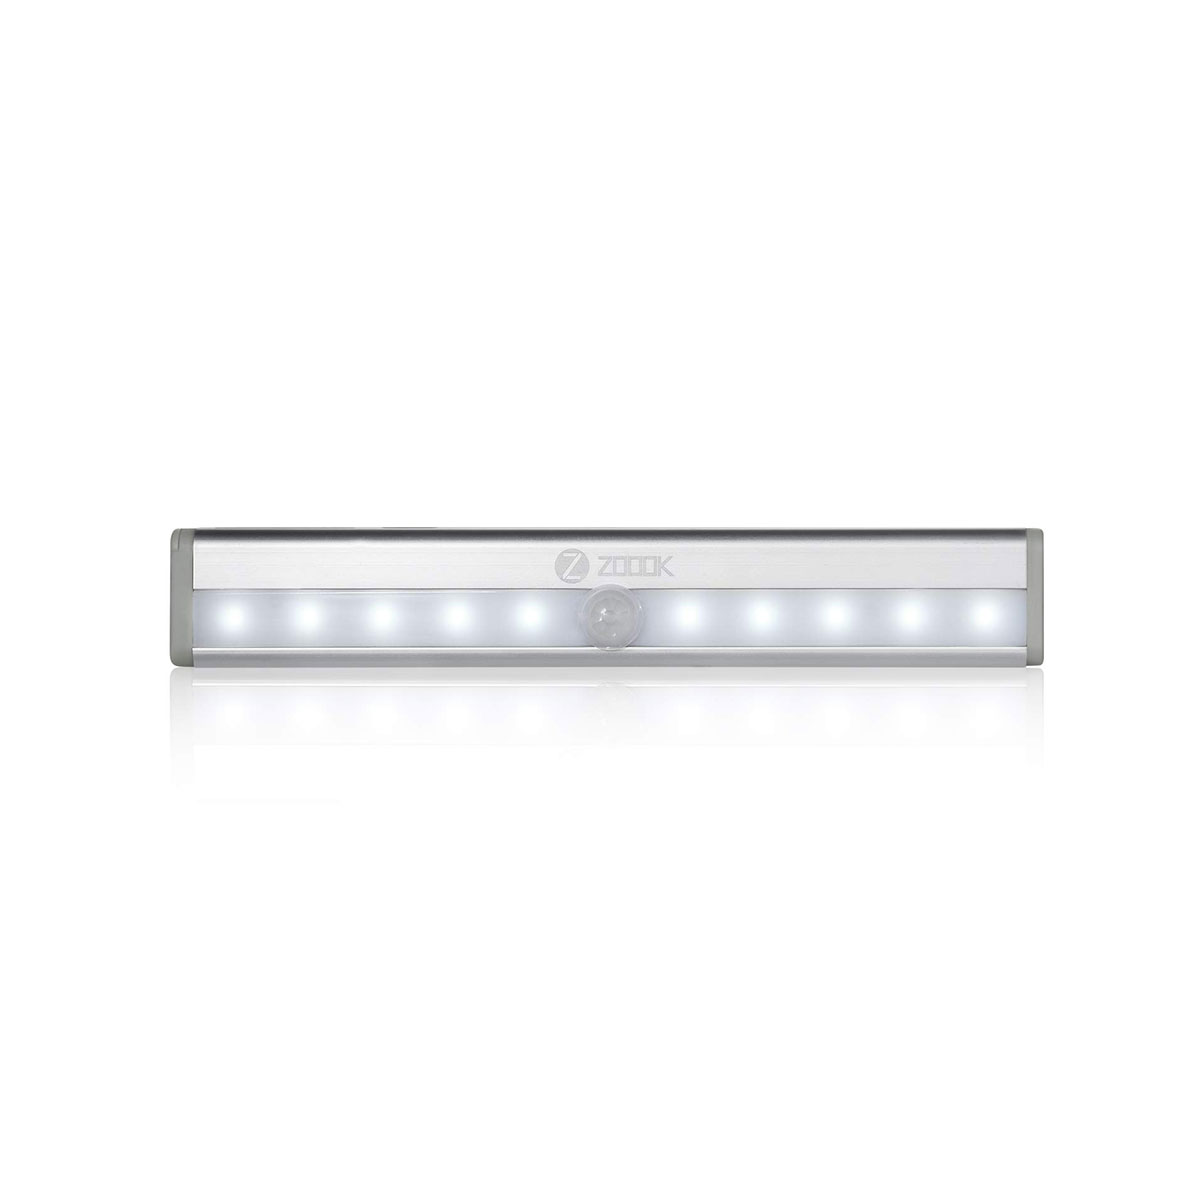 Zoook Sense Motion Sensor LED Light with 10 Led Bulbs and Very Bright